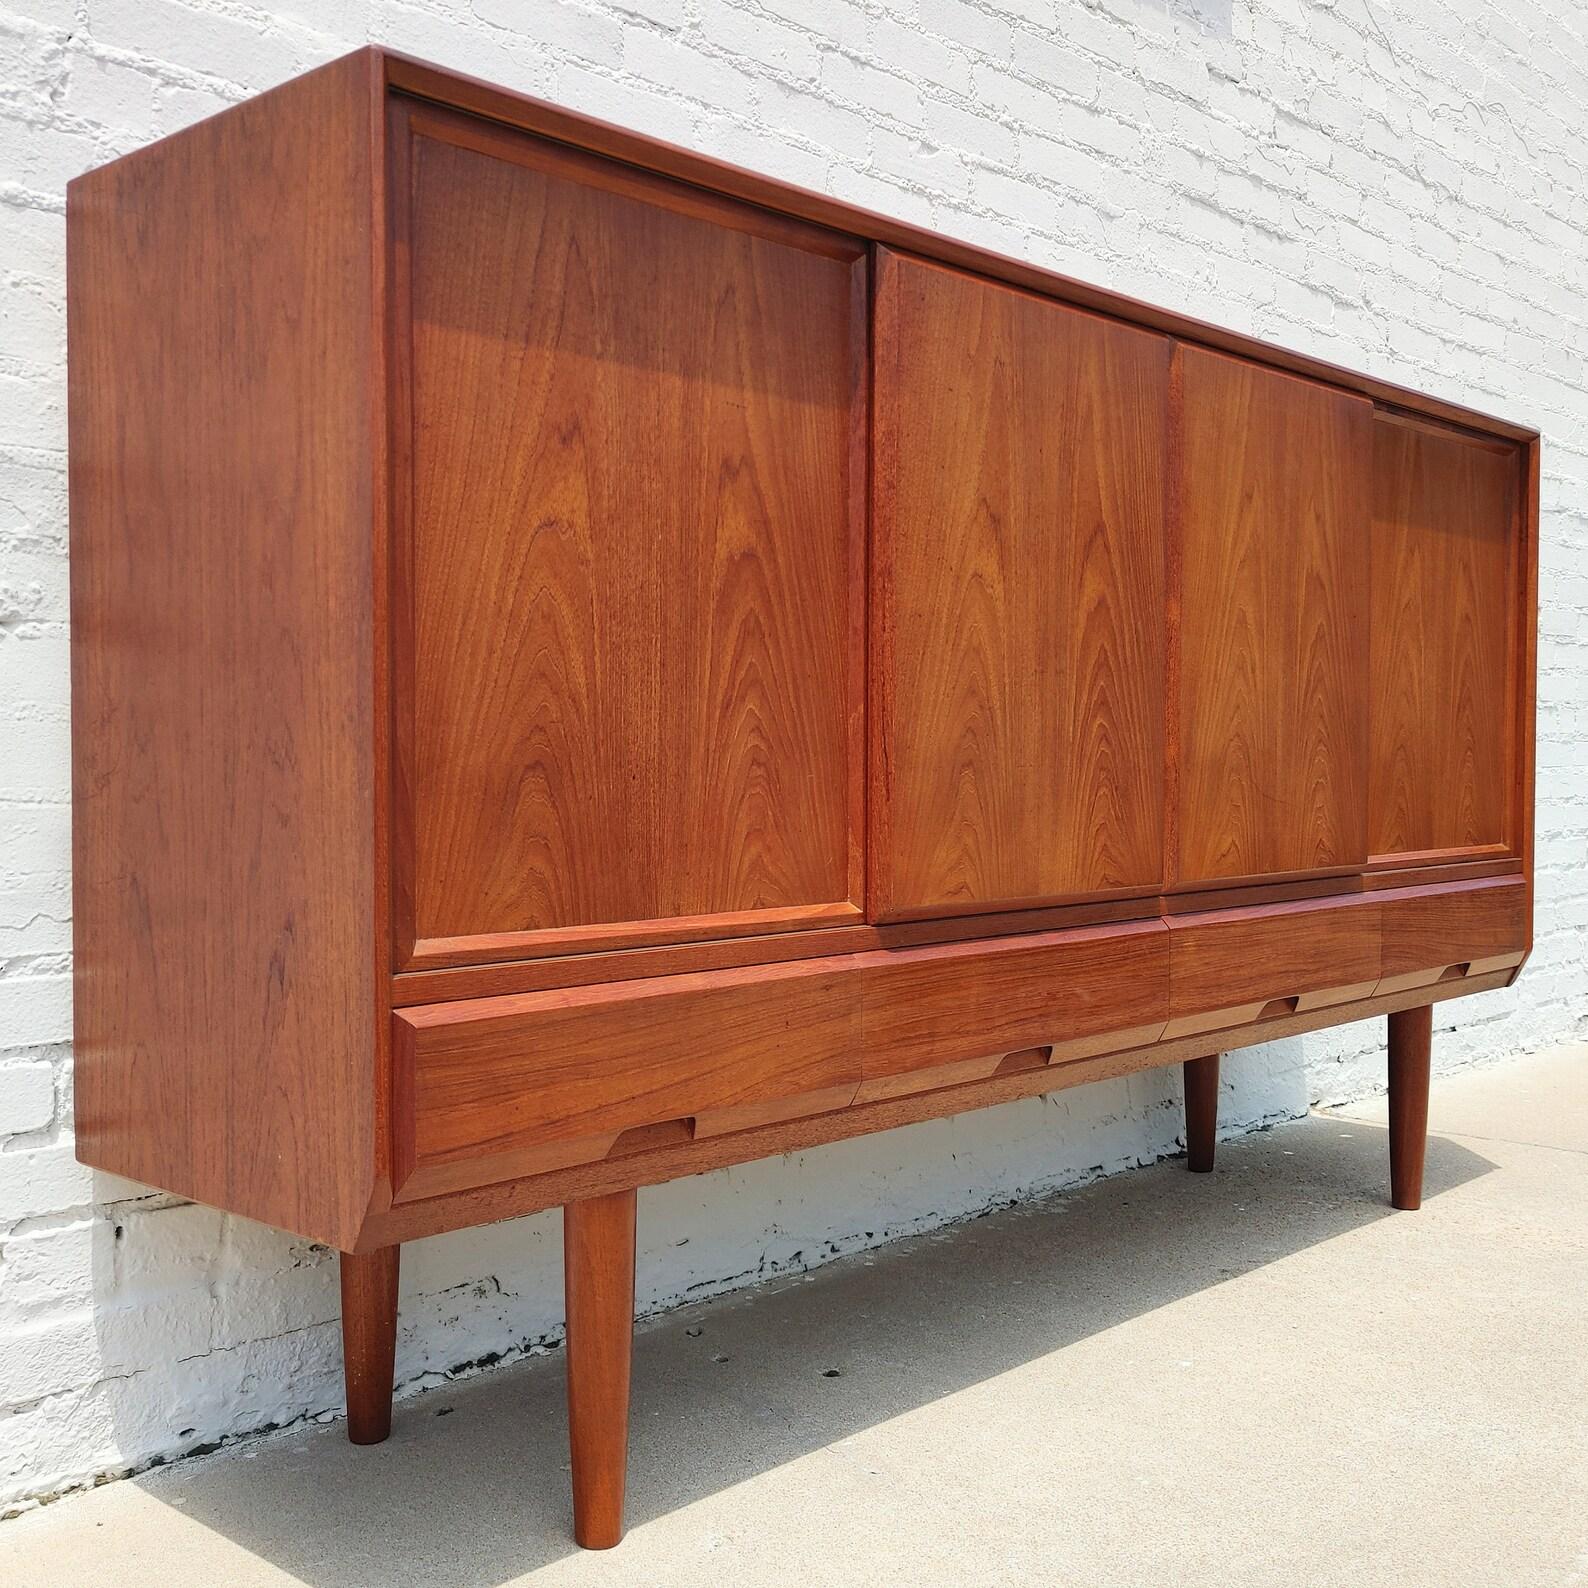 Mid Century Danish Modern Teak Cabinet
 
Above average vintage condition and structurally sound. Has some expected slight finish wear and scratching. Beautifully crafted with heavy construction. Has some discolorations on top with a couple